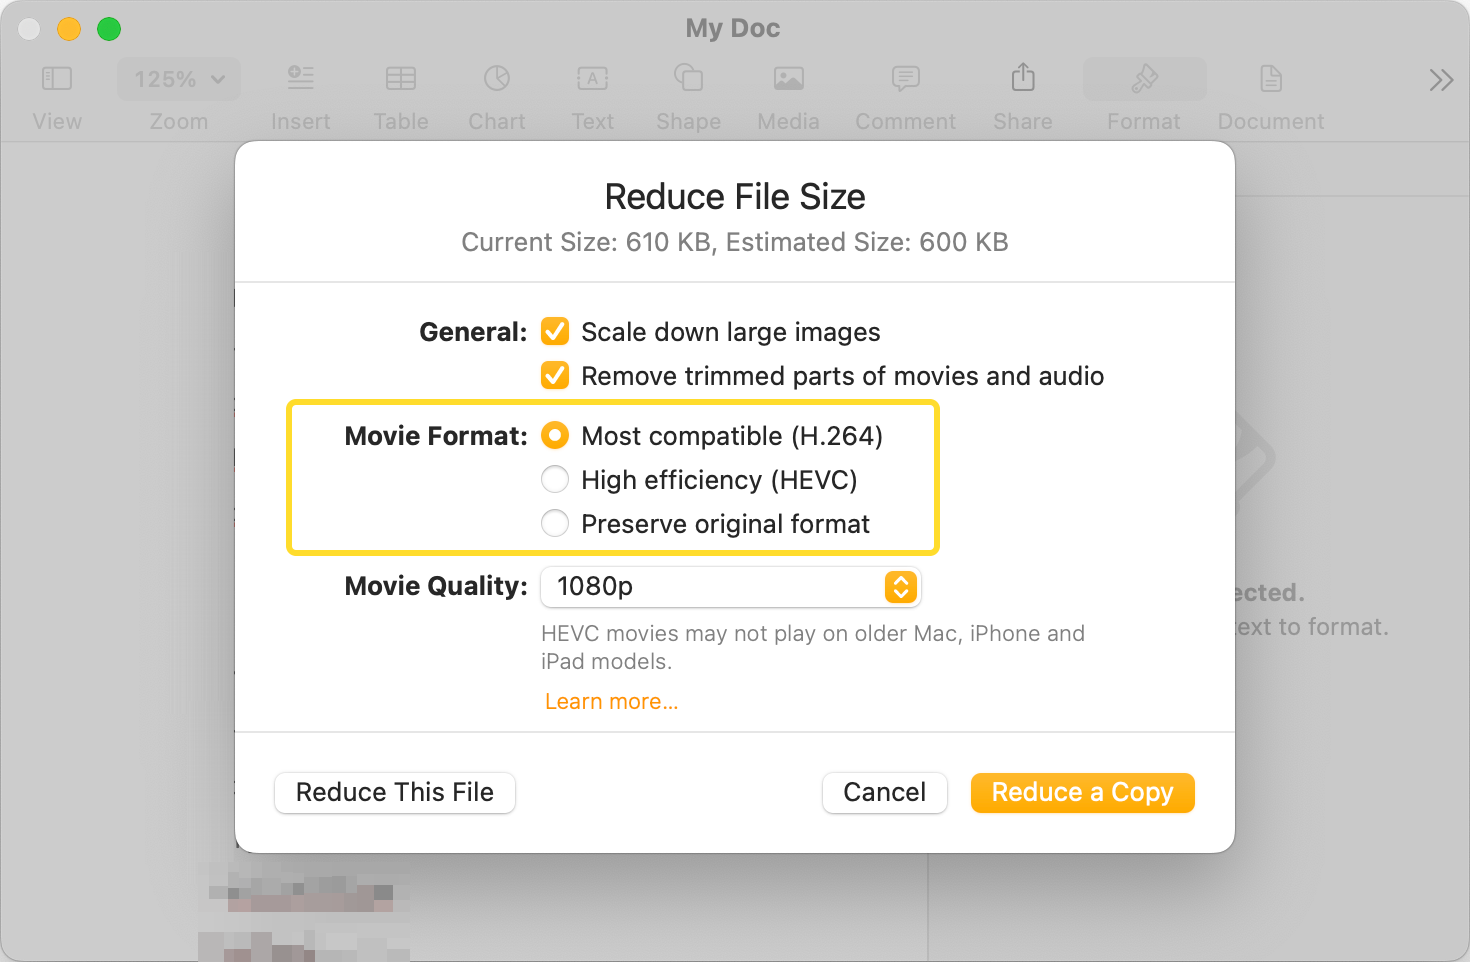 The Movie Format section of the Reduce File Size pop-up window is highlighted